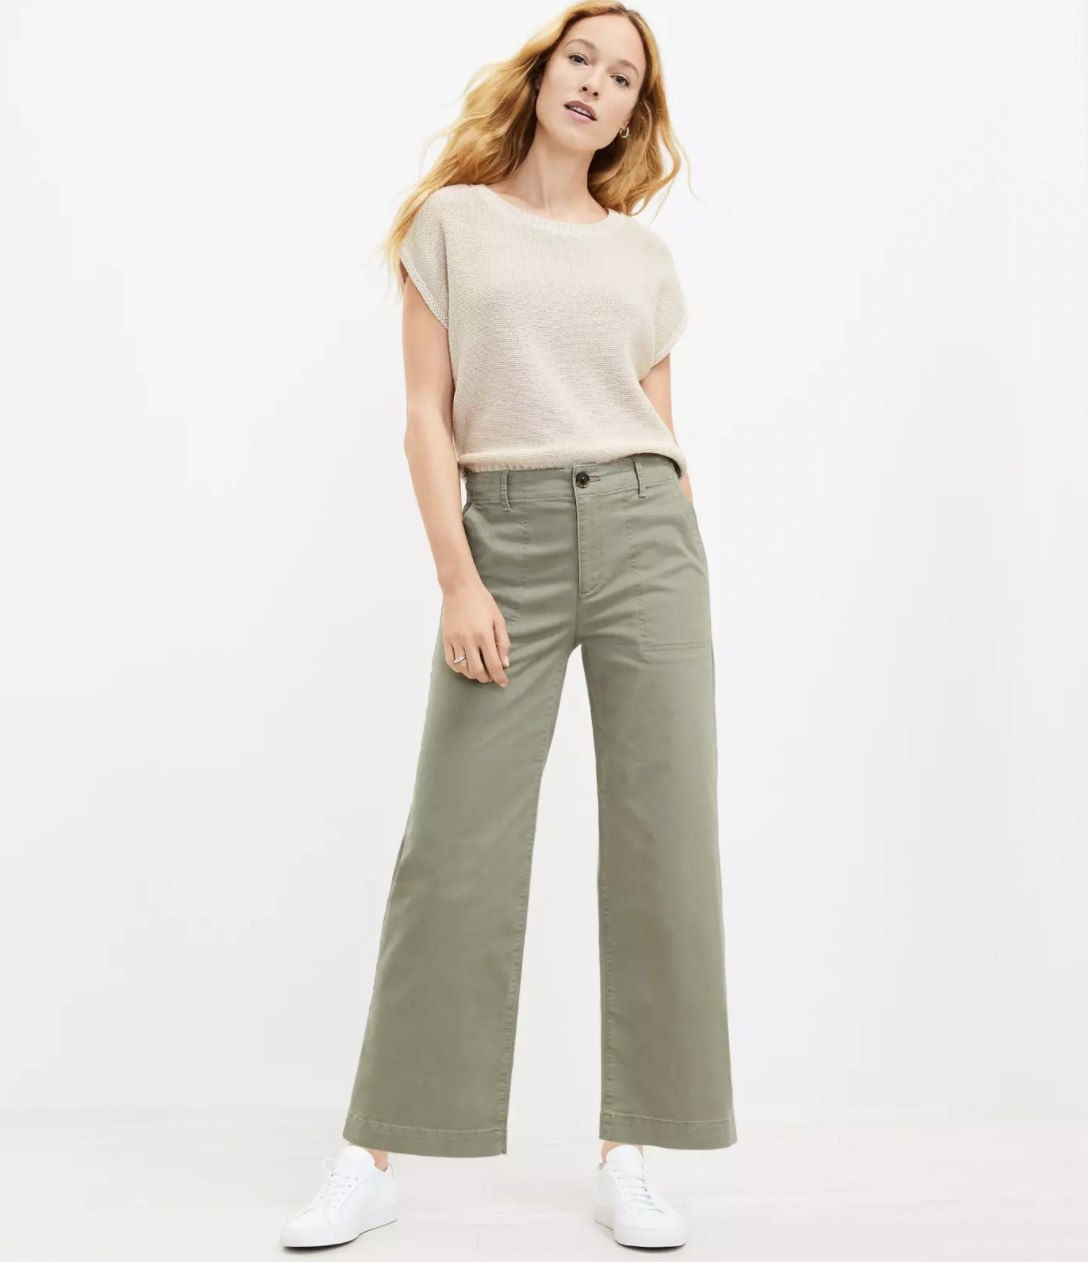 model in the green chinos